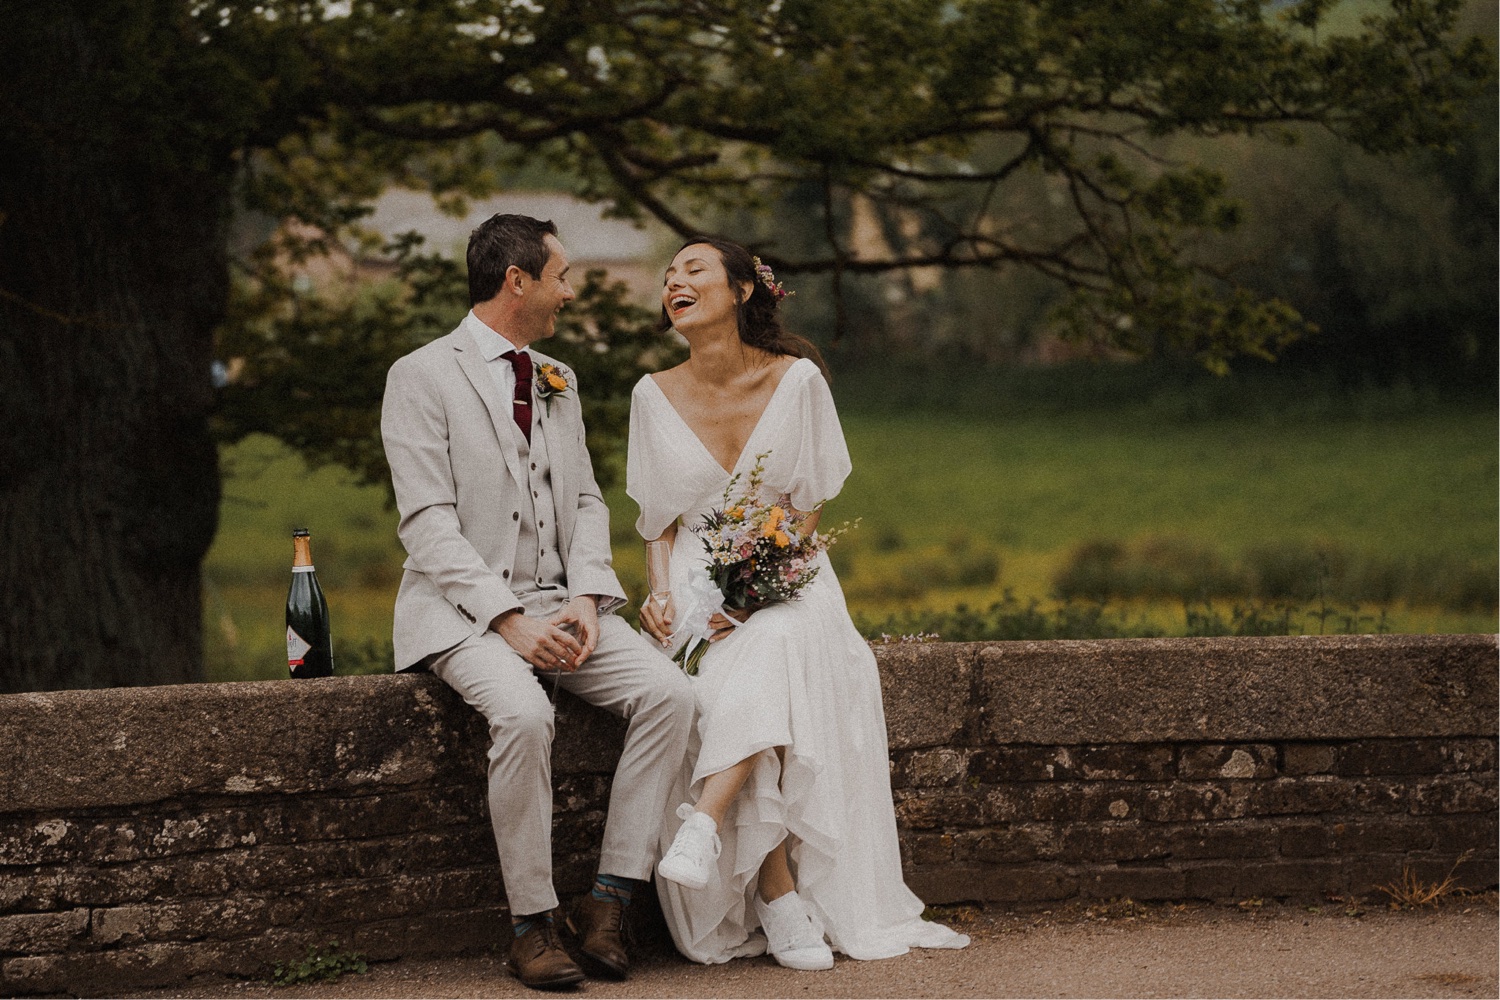 A couple in wedding photographs sitting on a stone wall.